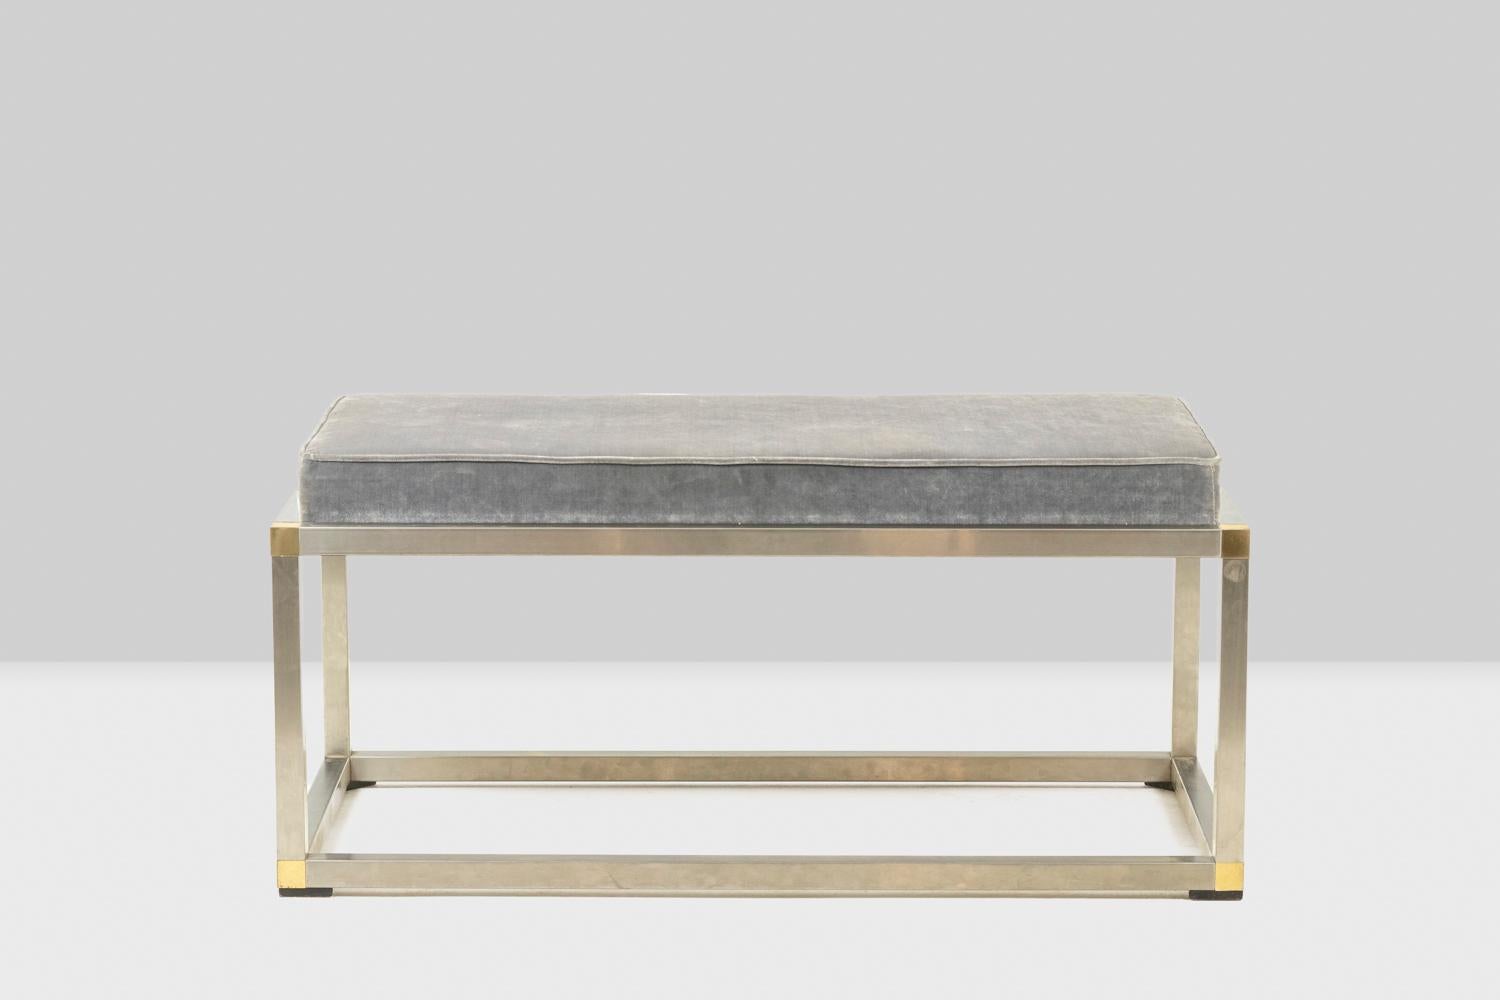 Bench in brushed metal, gold and silver, rectangular in shape. Blue velvet seat.

Work realized in the 1970s.